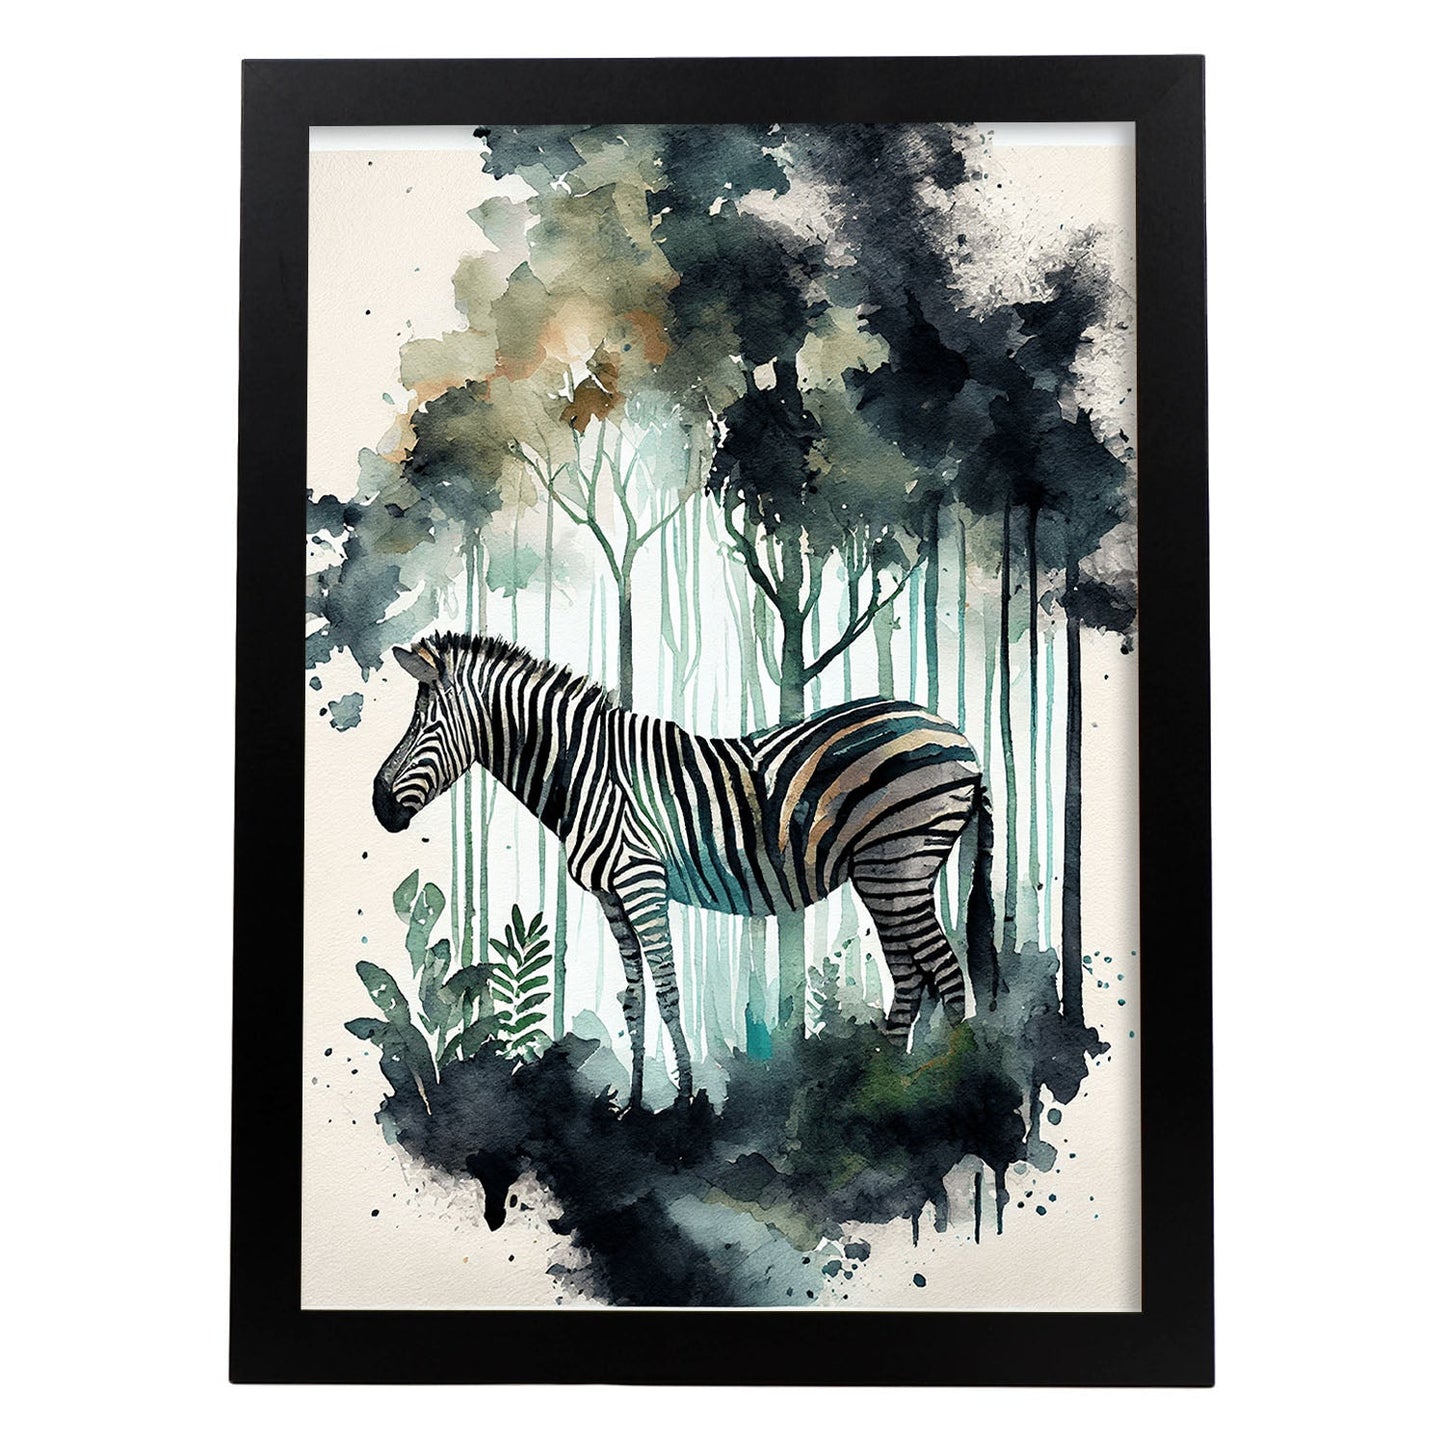 Nacnic Watercolor of Zebra in the forest. Aesthetic Wall Art Prints for Bedroom or Living Room Design.